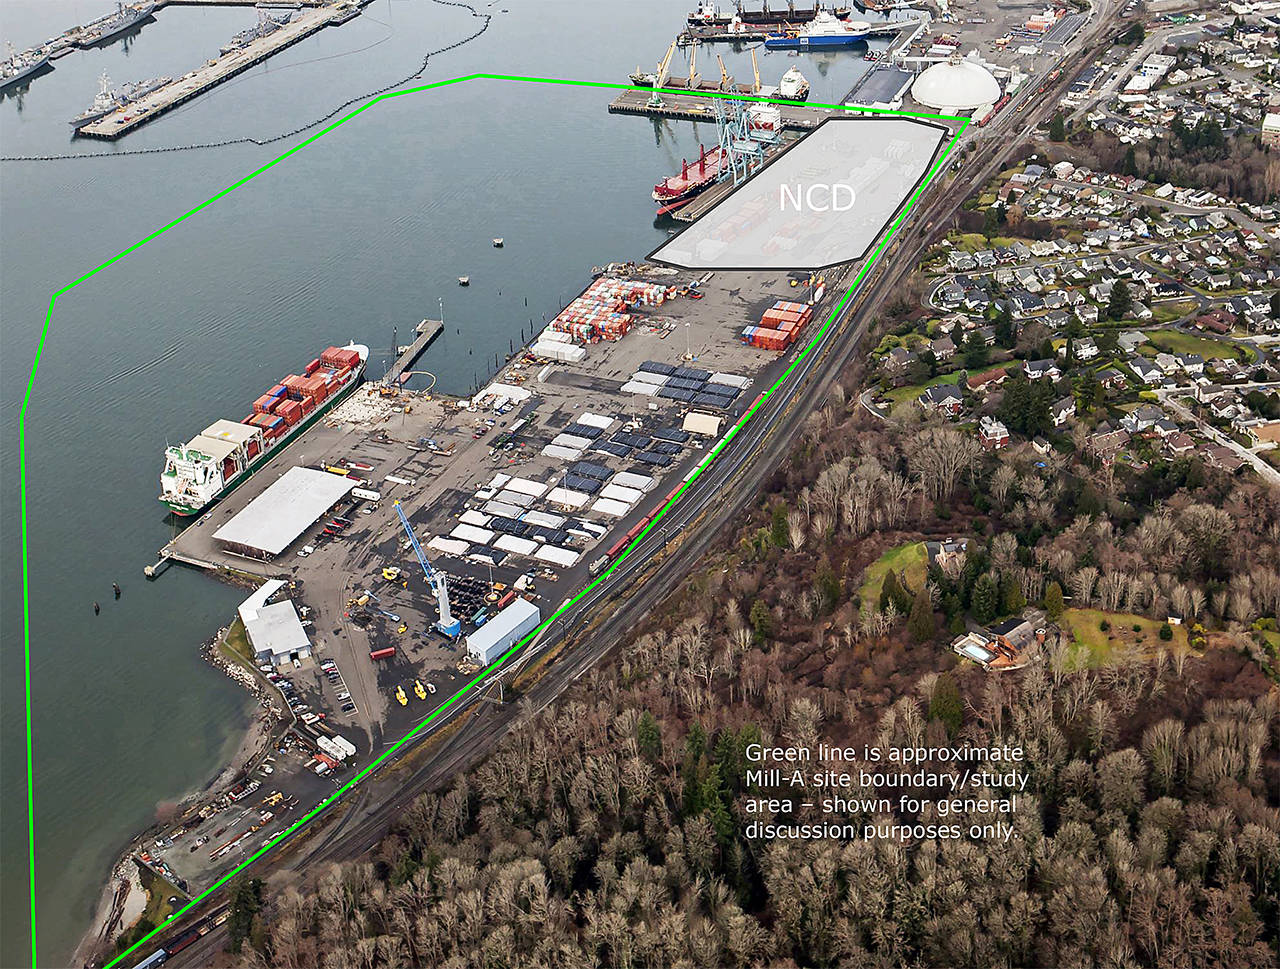 The green line is the approximate Mill A site boundary/study area. (Port of Everett)